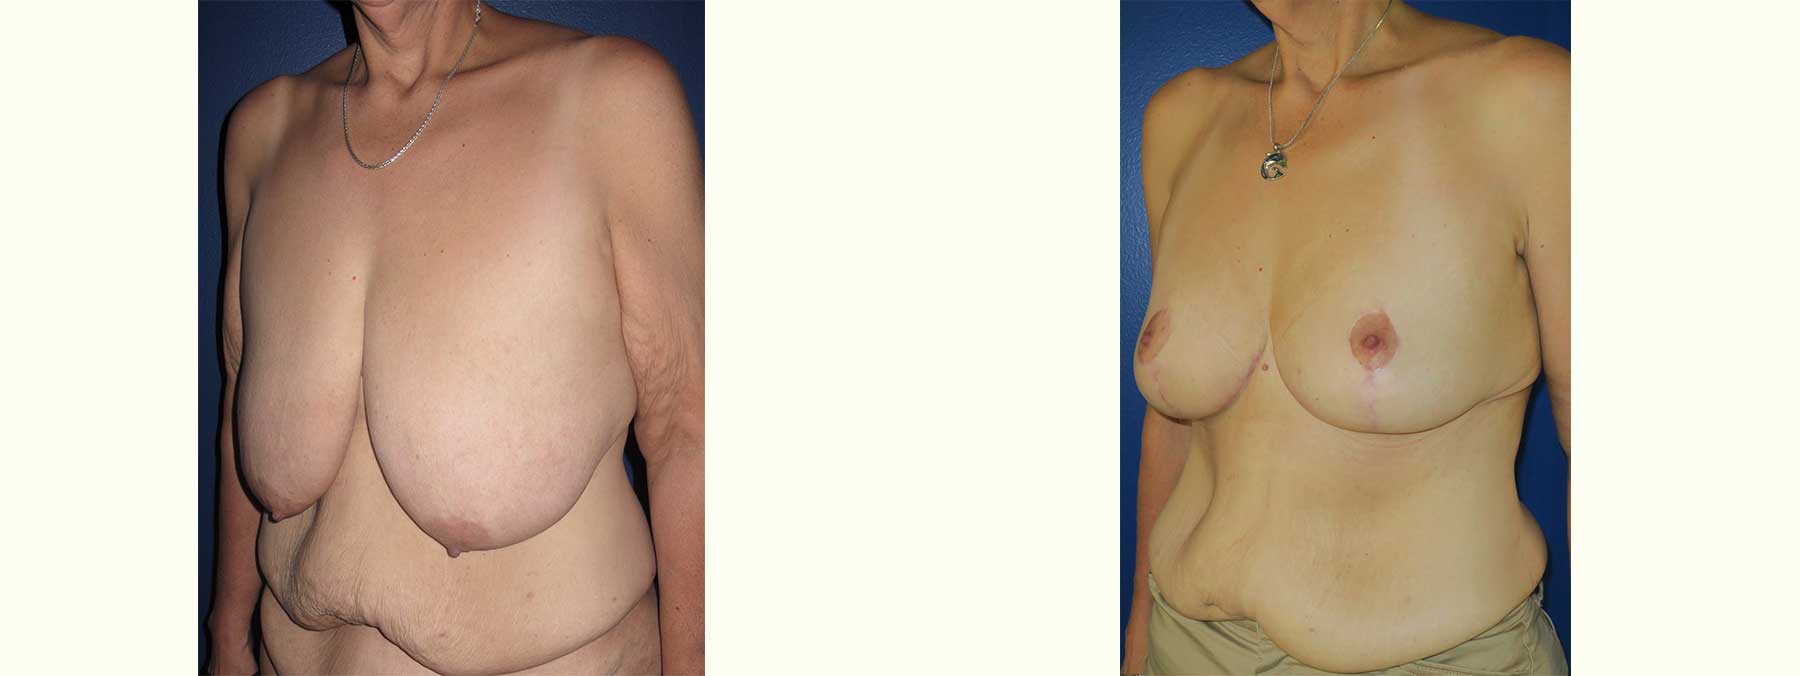 Before and After Image of Breast Lift Mastoplexy